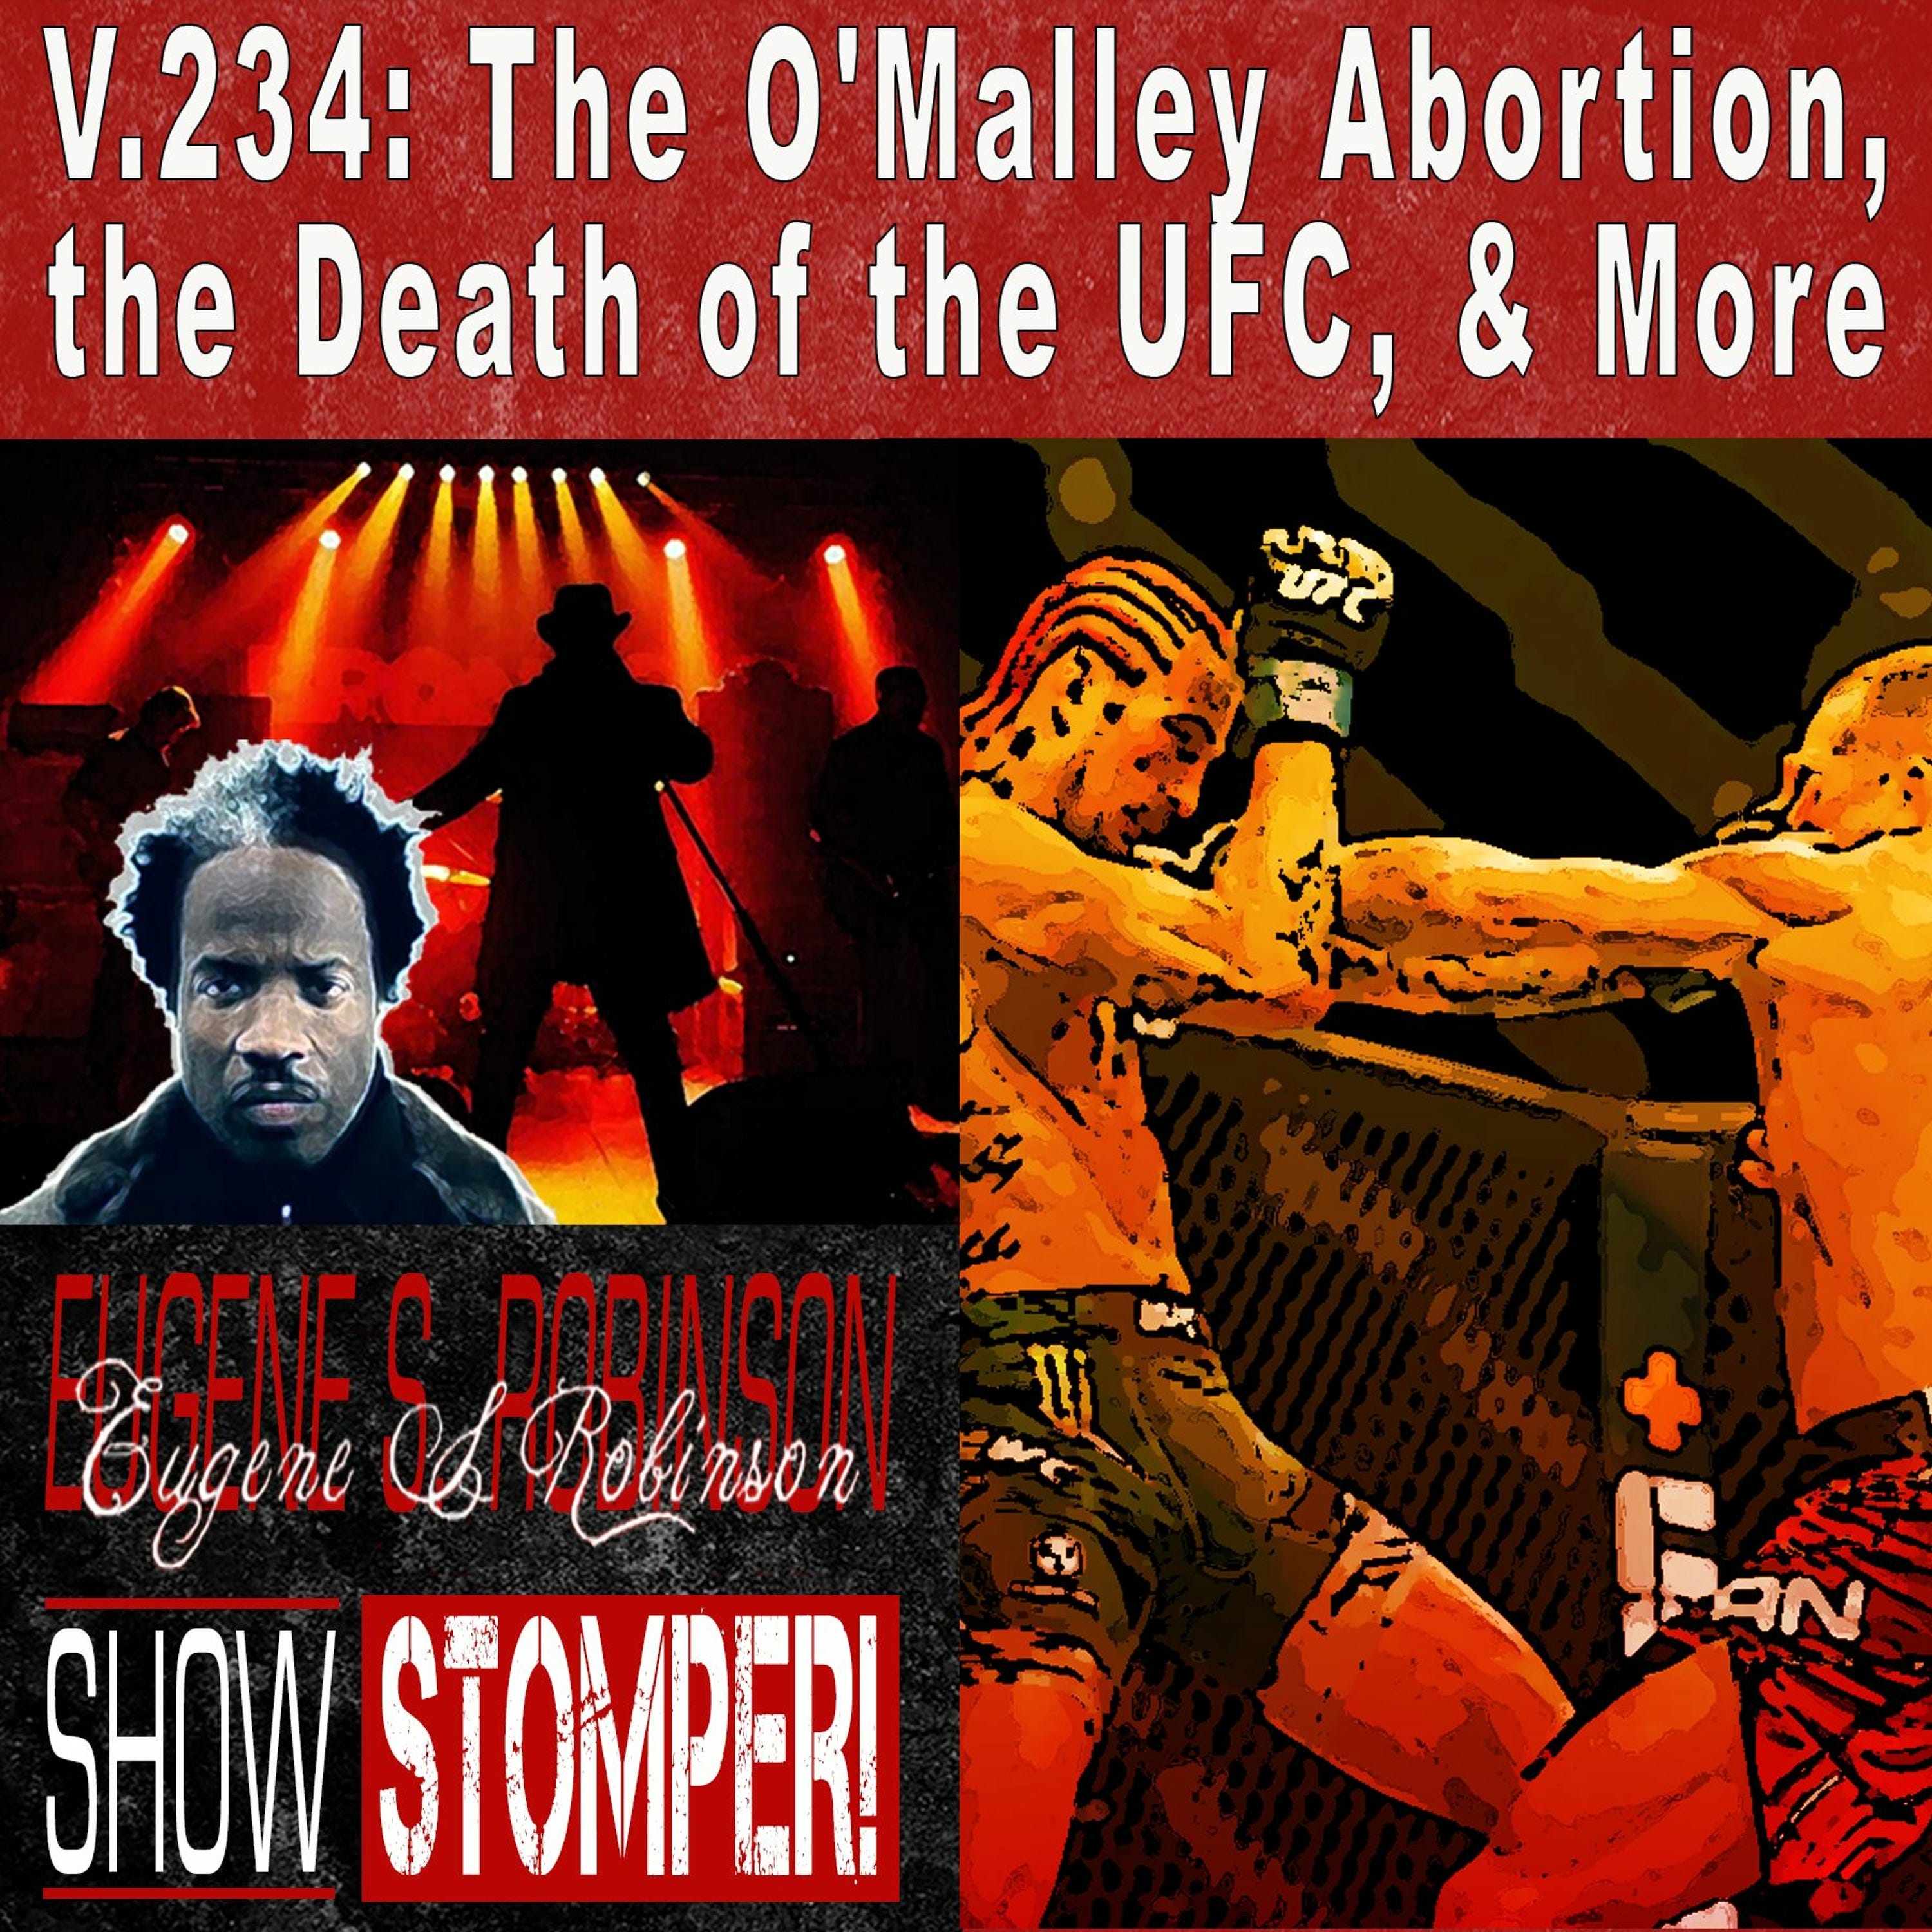 V.234: The O'Malley Abortion, the Death of the UFC + More On The Eugene S. Robinson Show Stomper!